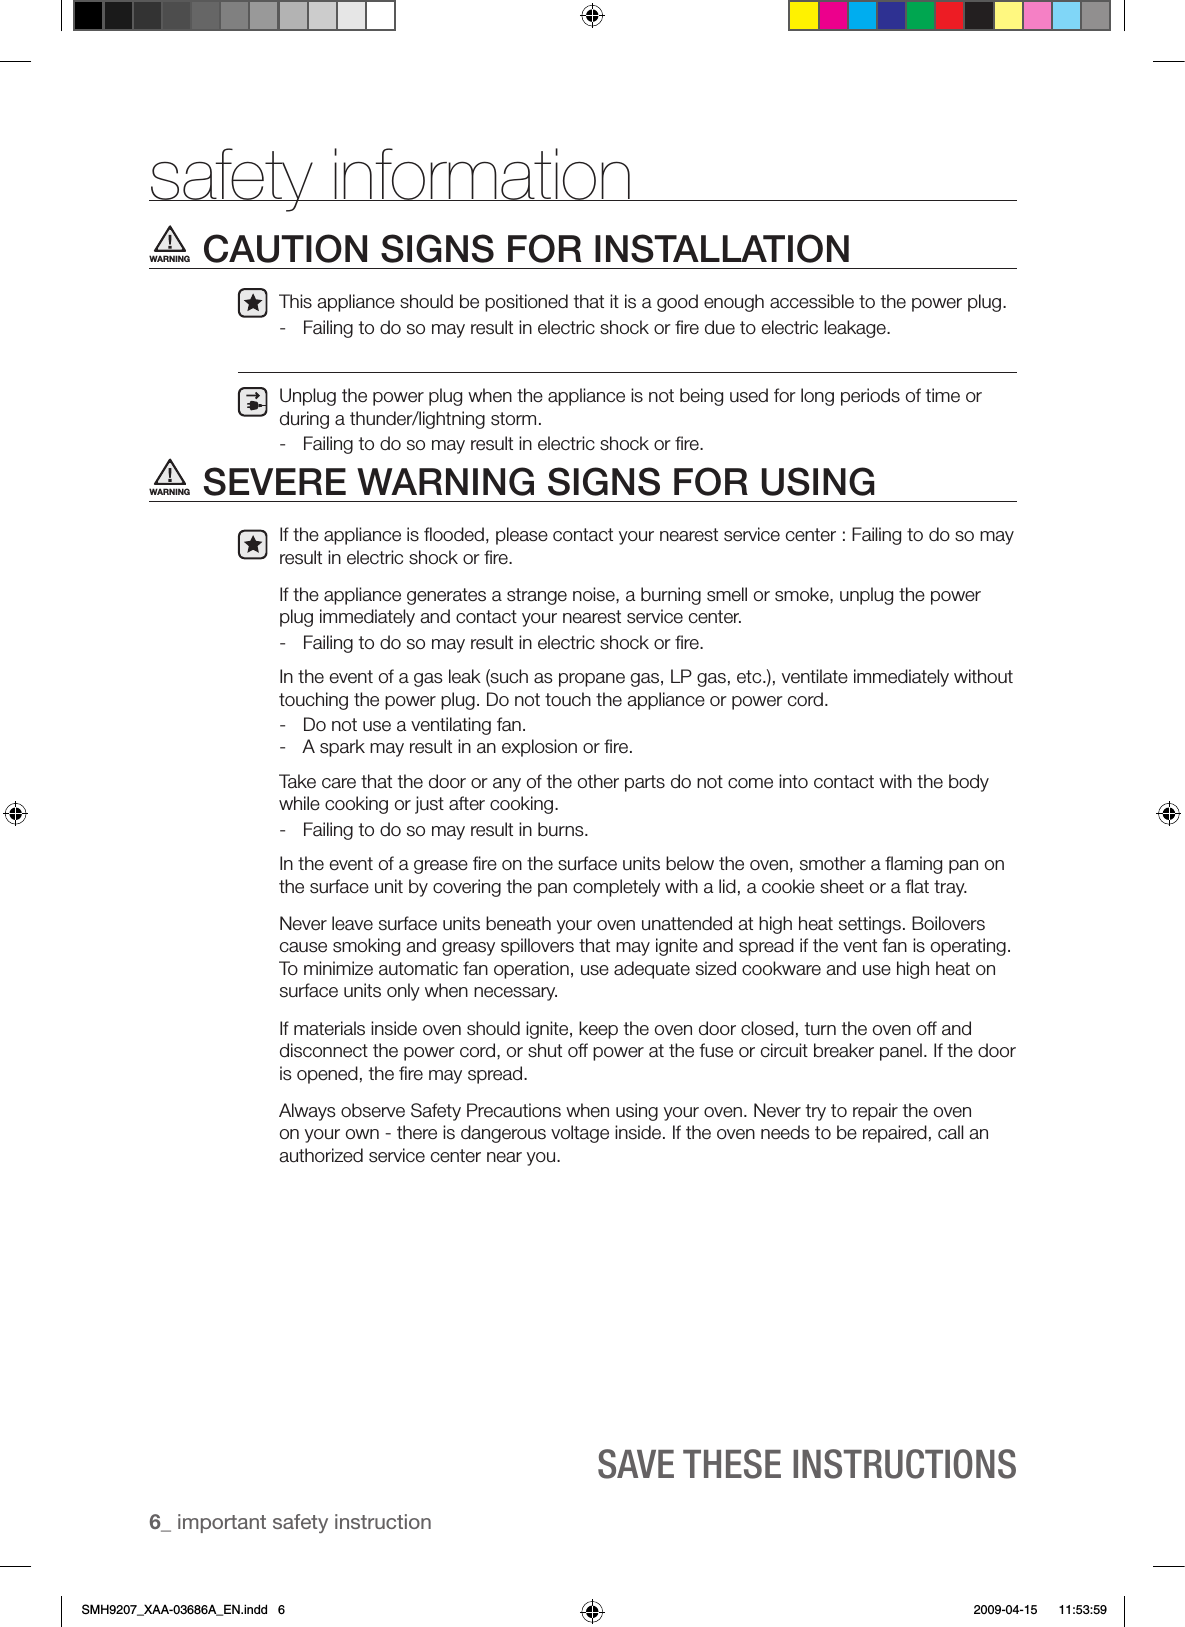 6_ important safety instructionSAVE ThESE INSTRUCTIONSsafety informationCAUTION SIGNS FOR INSTALLATIONThis appliance should be positioned that it is a good enough accessible to the power plug.-  Failing to do so may result in electric shock or ﬁre due to electric leakage.Unplug the power plug when the appliance is not being used for long periods of time or during a thunder/lightning storm. -  Failing to do so may result in electric shock or ﬁre.SEVERE WARNING SIGNS FOR USINGIf the appliance is ﬂooded, please contact your nearest service center : Failing to do so may result in electric shock or ﬁre.If the appliance generates a strange noise, a burning smell or smoke, unplug the power plug immediately and contact your nearest service center.-  Failing to do so may result in electric shock or ﬁre. In the event of a gas leak (such as propane gas, LP gas, etc.), ventilate immediately without touching the power plug. Do not touch the appliance or power cord.-  Do not use a ventilating fan.-  A spark may result in an explosion or ﬁre.Take care that the door or any of the other parts do not come into contact with the body while cooking or just after cooking.-  Failing to do so may result in burns.In the event of a grease ﬁre on the surface units below the oven, smother a ﬂaming pan on the surface unit by covering the pan completely with a lid, a cookie sheet or a ﬂat tray.Never leave surface units beneath your oven unattended at high heat settings. Boilovers cause smoking and greasy spillovers that may ignite and spread if the vent fan is operating.To minimize automatic fan operation, use adequate sized cookware and use high heat on surface units only when necessary.If materials inside oven should ignite, keep the oven door closed, turn the oven off and disconnect the power cord, or shut off power at the fuse or circuit breaker panel. If the door is opened, the ﬁre may spread.Always observe Safety Precautions when using your oven. Never try to repair the oven on your own - there is dangerous voltage inside. If the oven needs to be repaired, call an authorized service center near you.WARNINGWARNINGSMH9207_XAA-03686A_EN.indd   6 2009-04-15    11:53:59